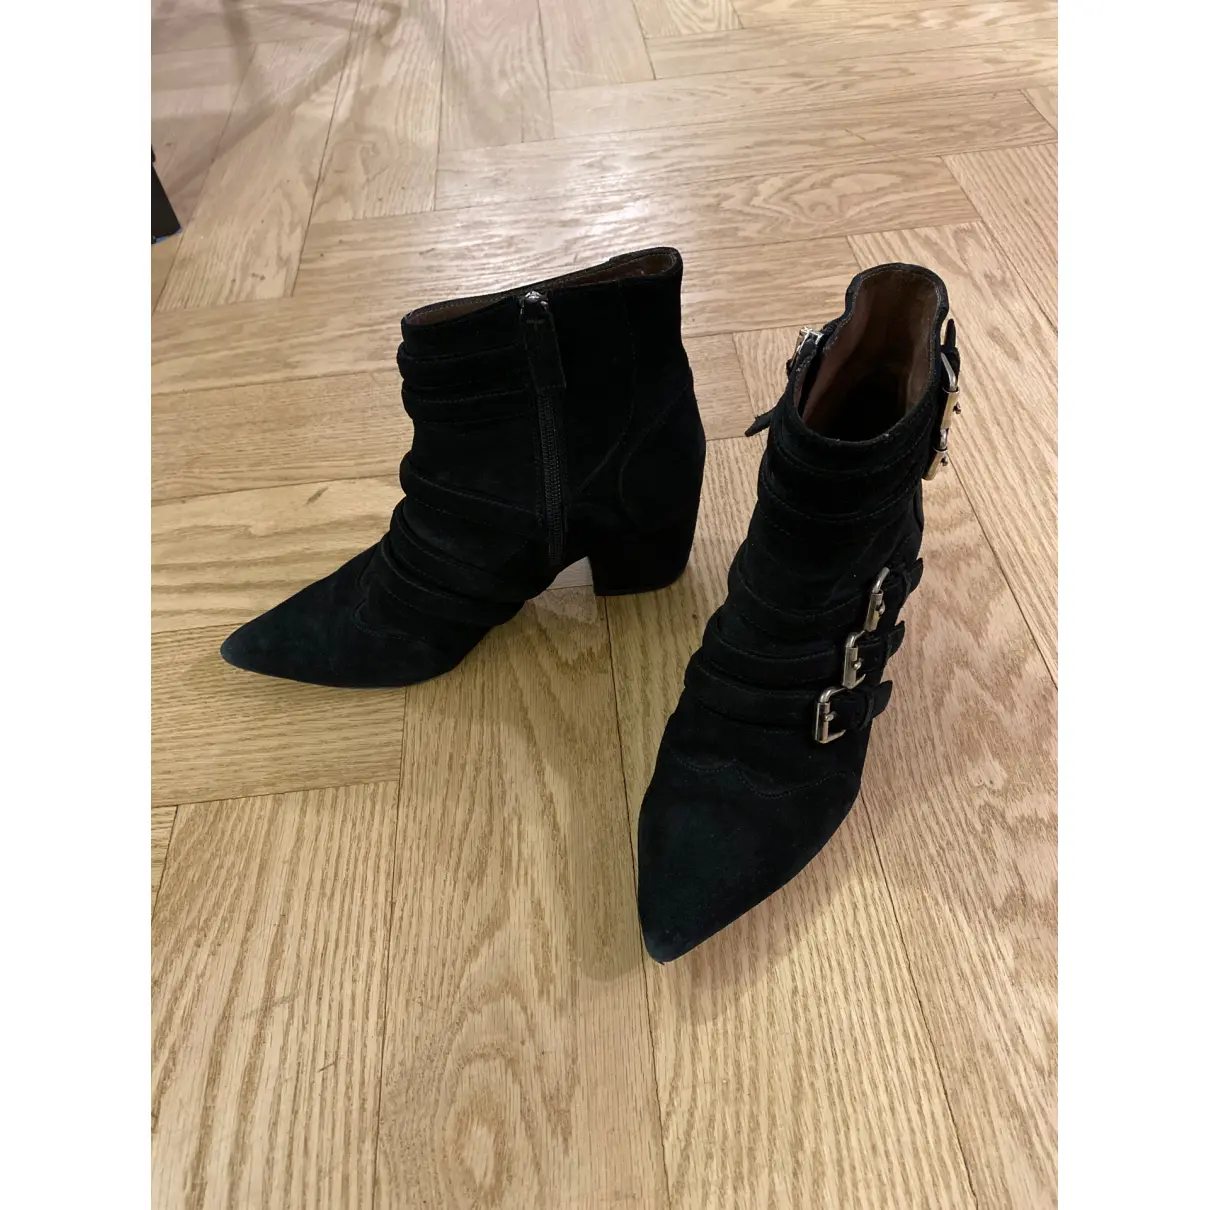 Buy Tabitha Simmons Buckled boots online